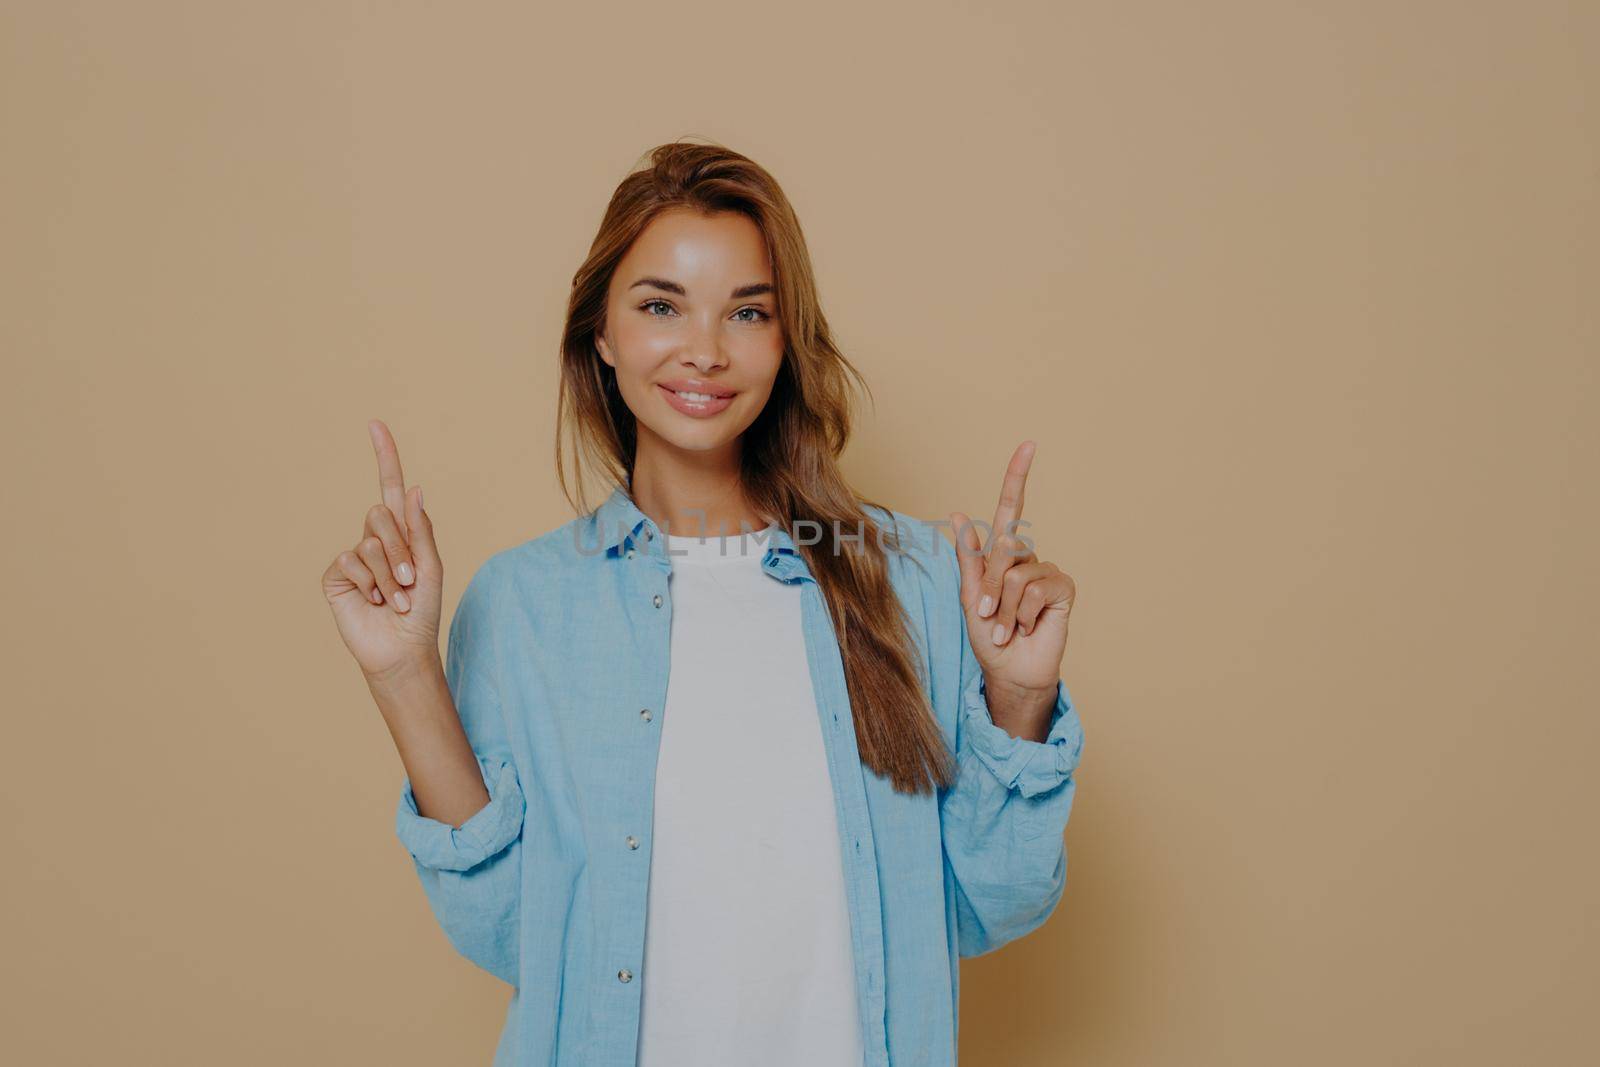 Advertising concept. Excited cheerful european female with long brunette hair wearing casual clothes and smiling happily, pointing index fingers up against beige background, attracting customers